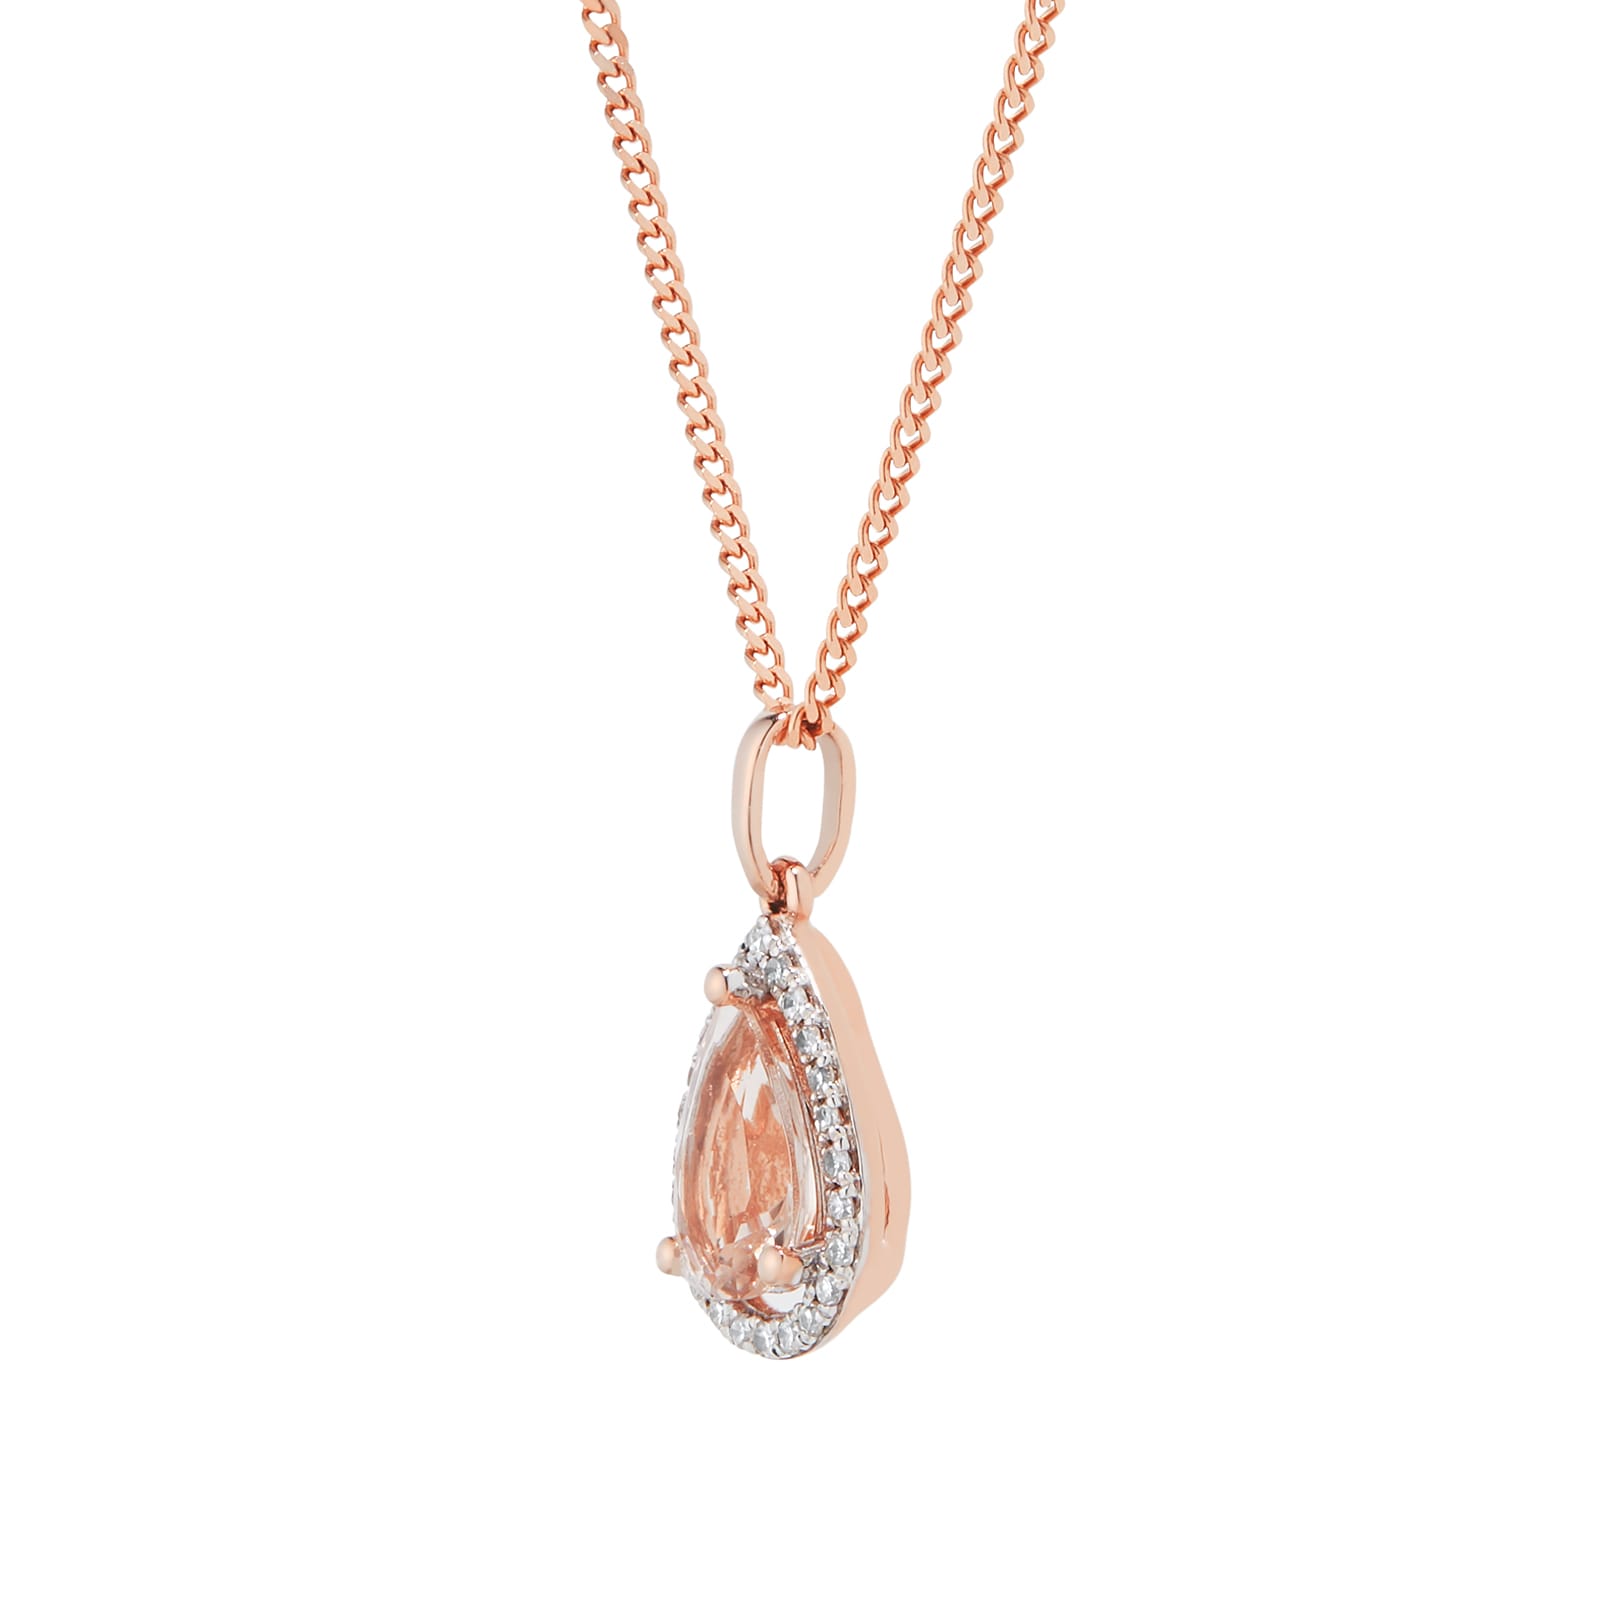 Amazon.com: Shineadime 1.10 CT Round Cut White Natural Diamond & Oval Cut Morganite  Pendant Necklace 14K Rose Gold over 925 Sterling Silver with 18